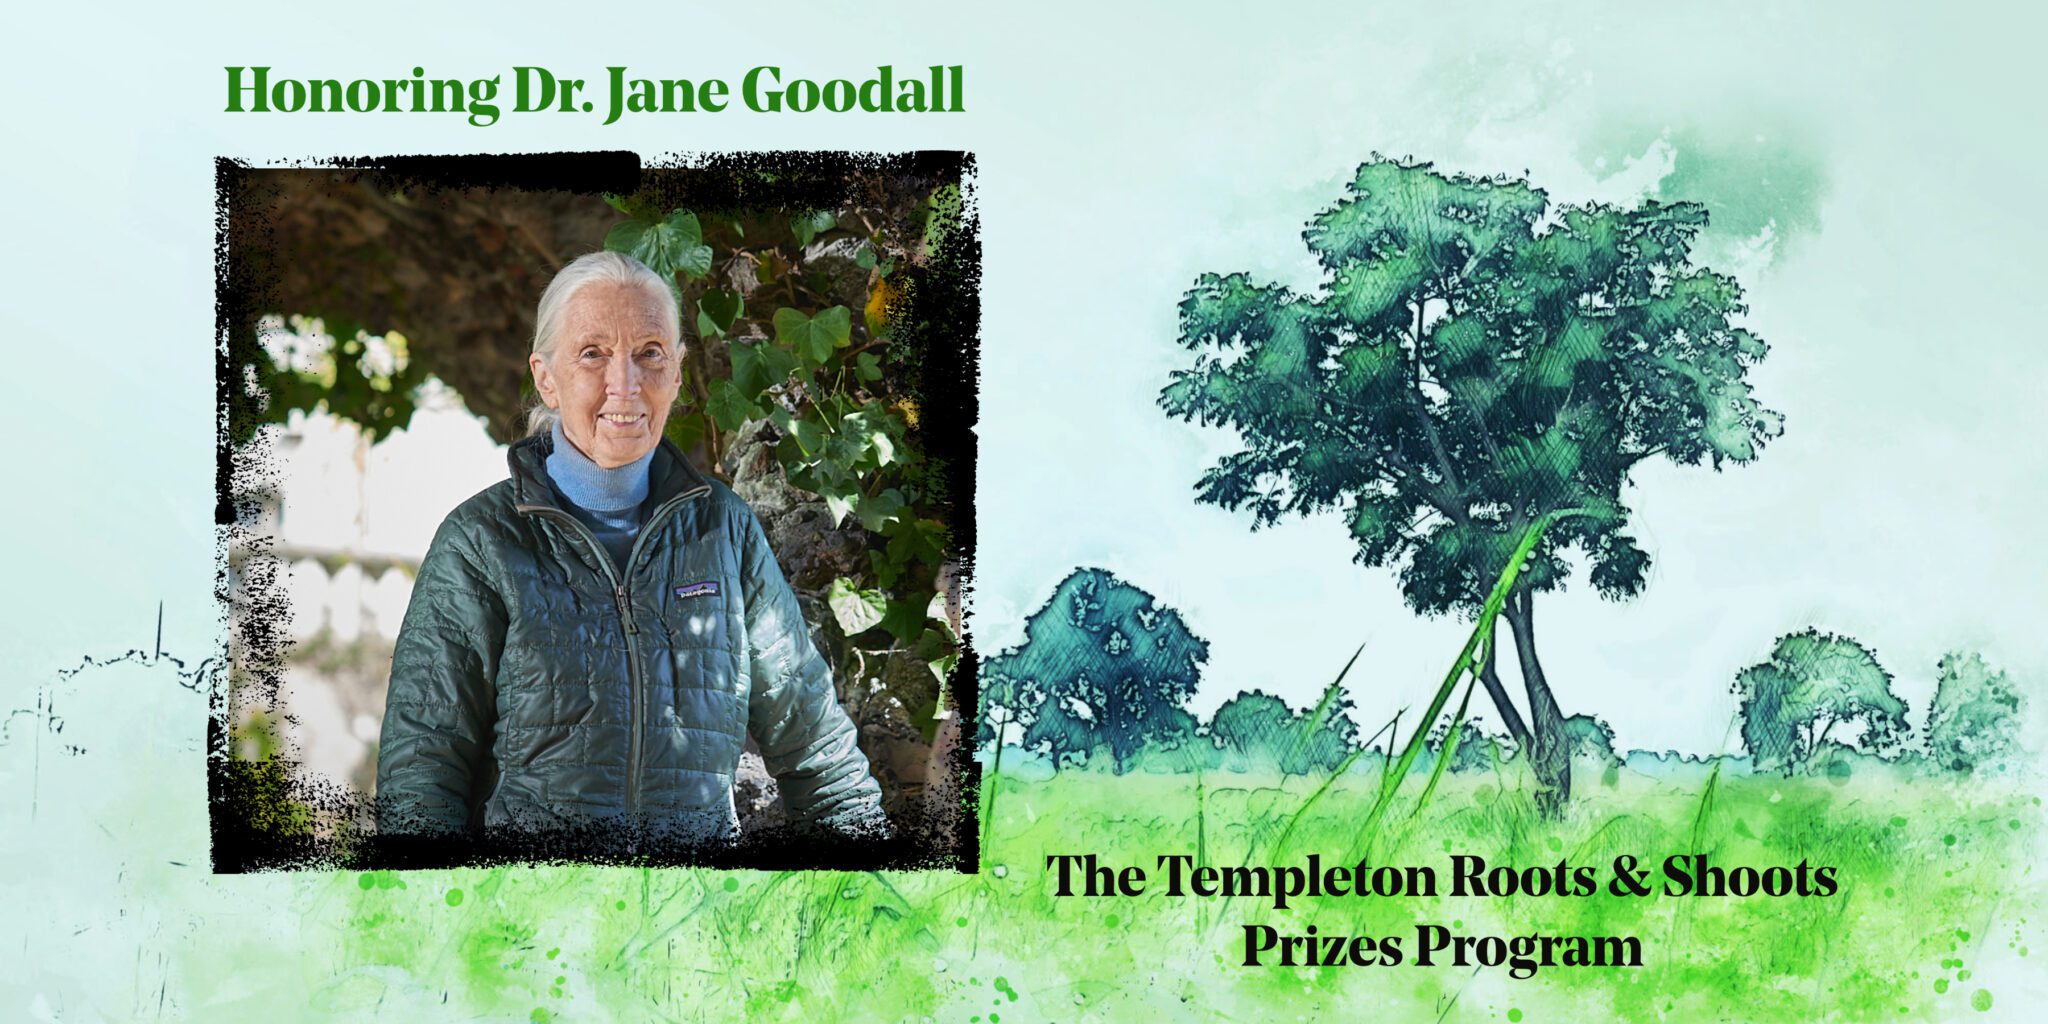 Jane Goodall Institute Announces Winners of Inaugural Templeton Roots & Shoots Prizes